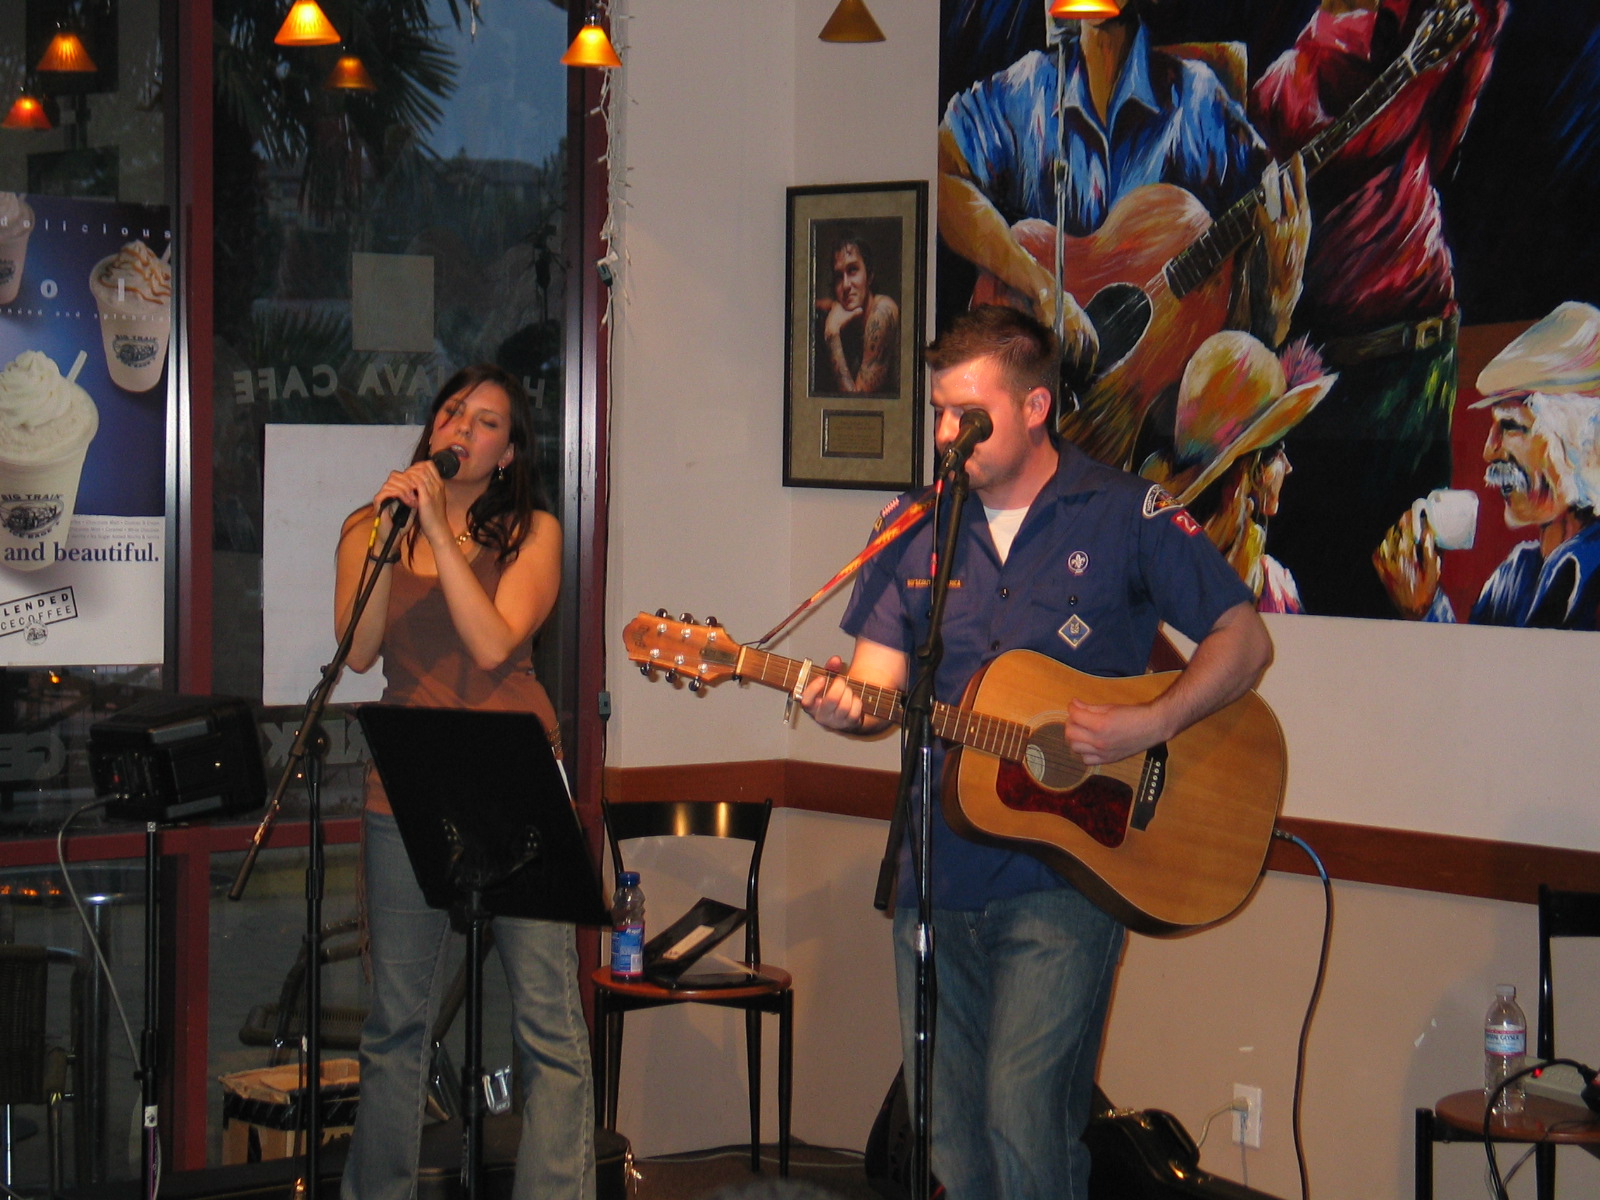 a man and woman playing guitars together in a bar